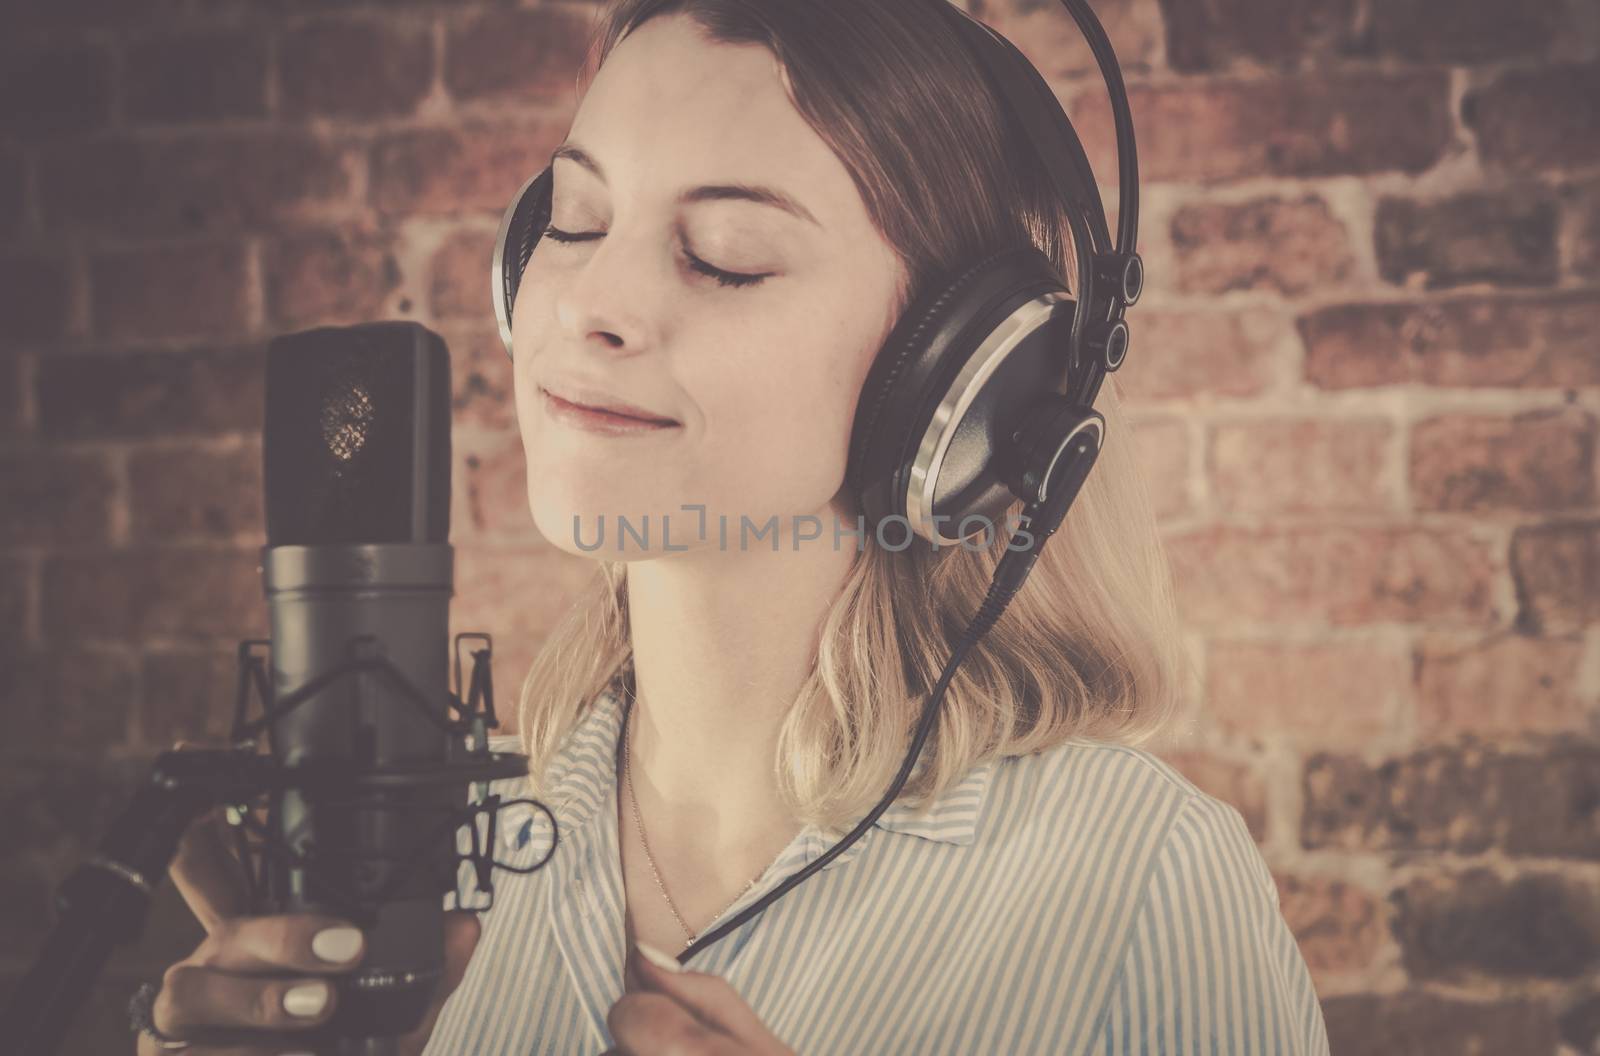 Voice Over Recording by welcomia